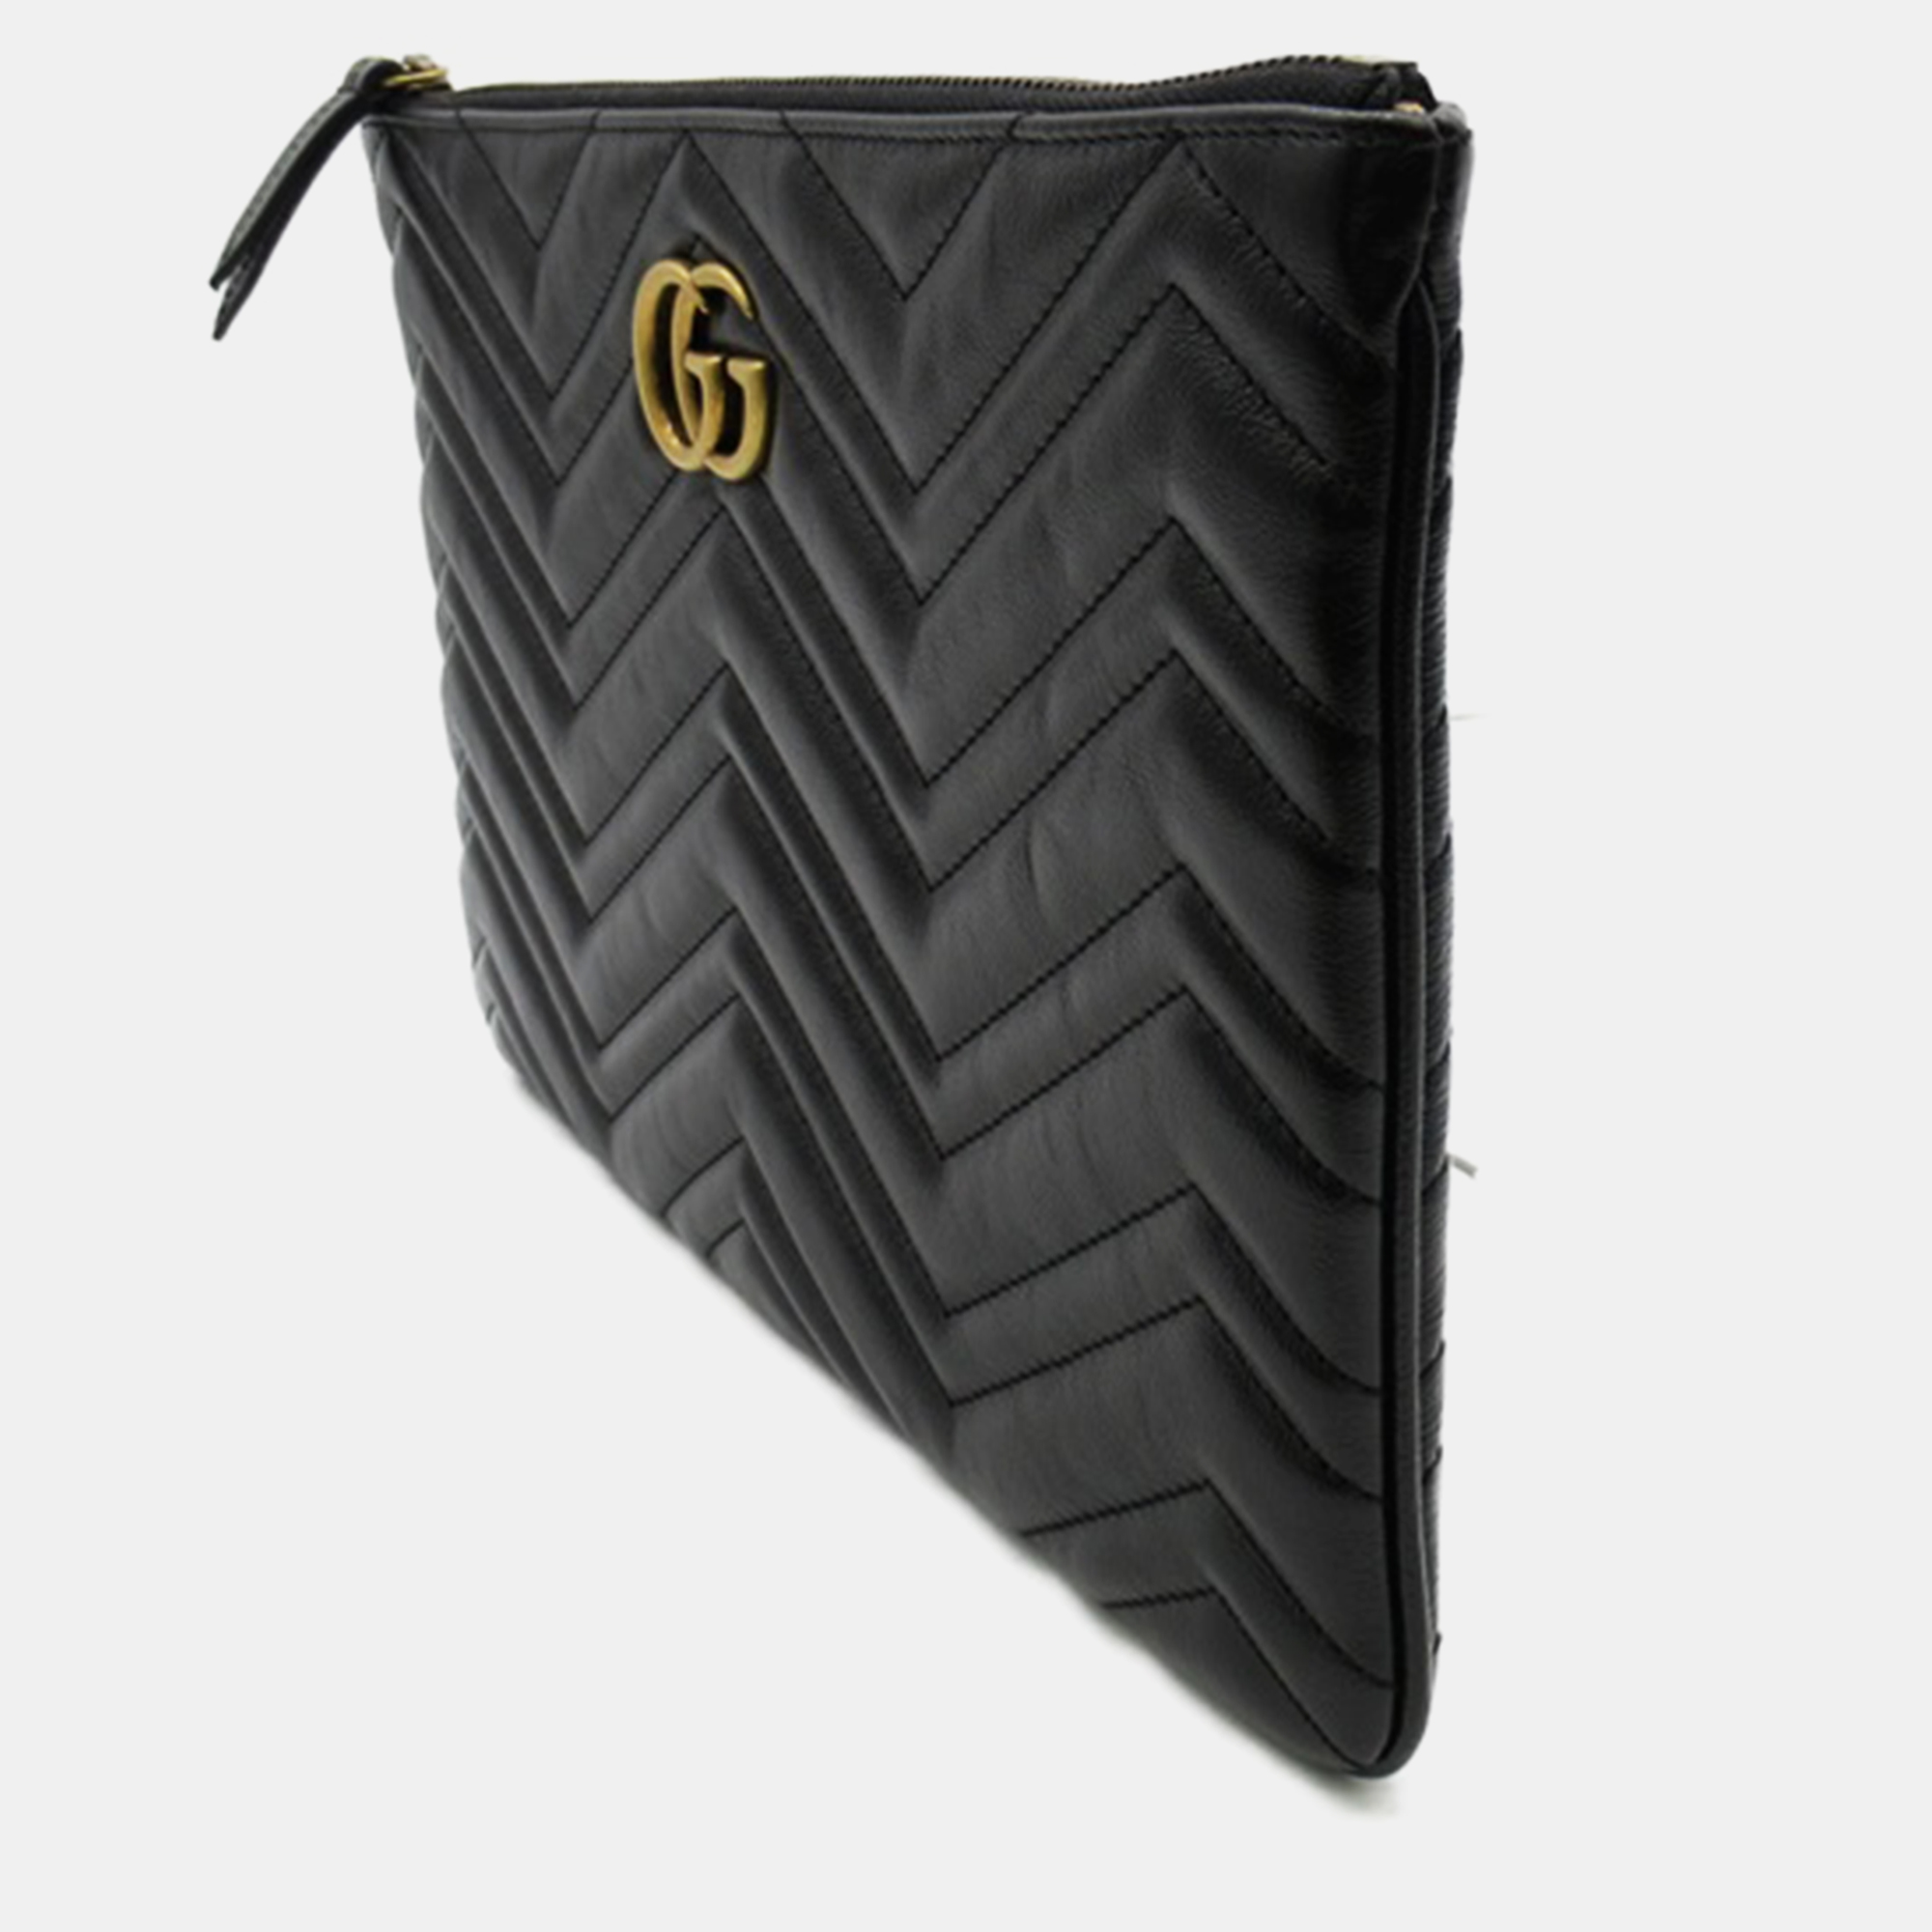 

Gucci Black Leather GG Marmont Clutch Bag